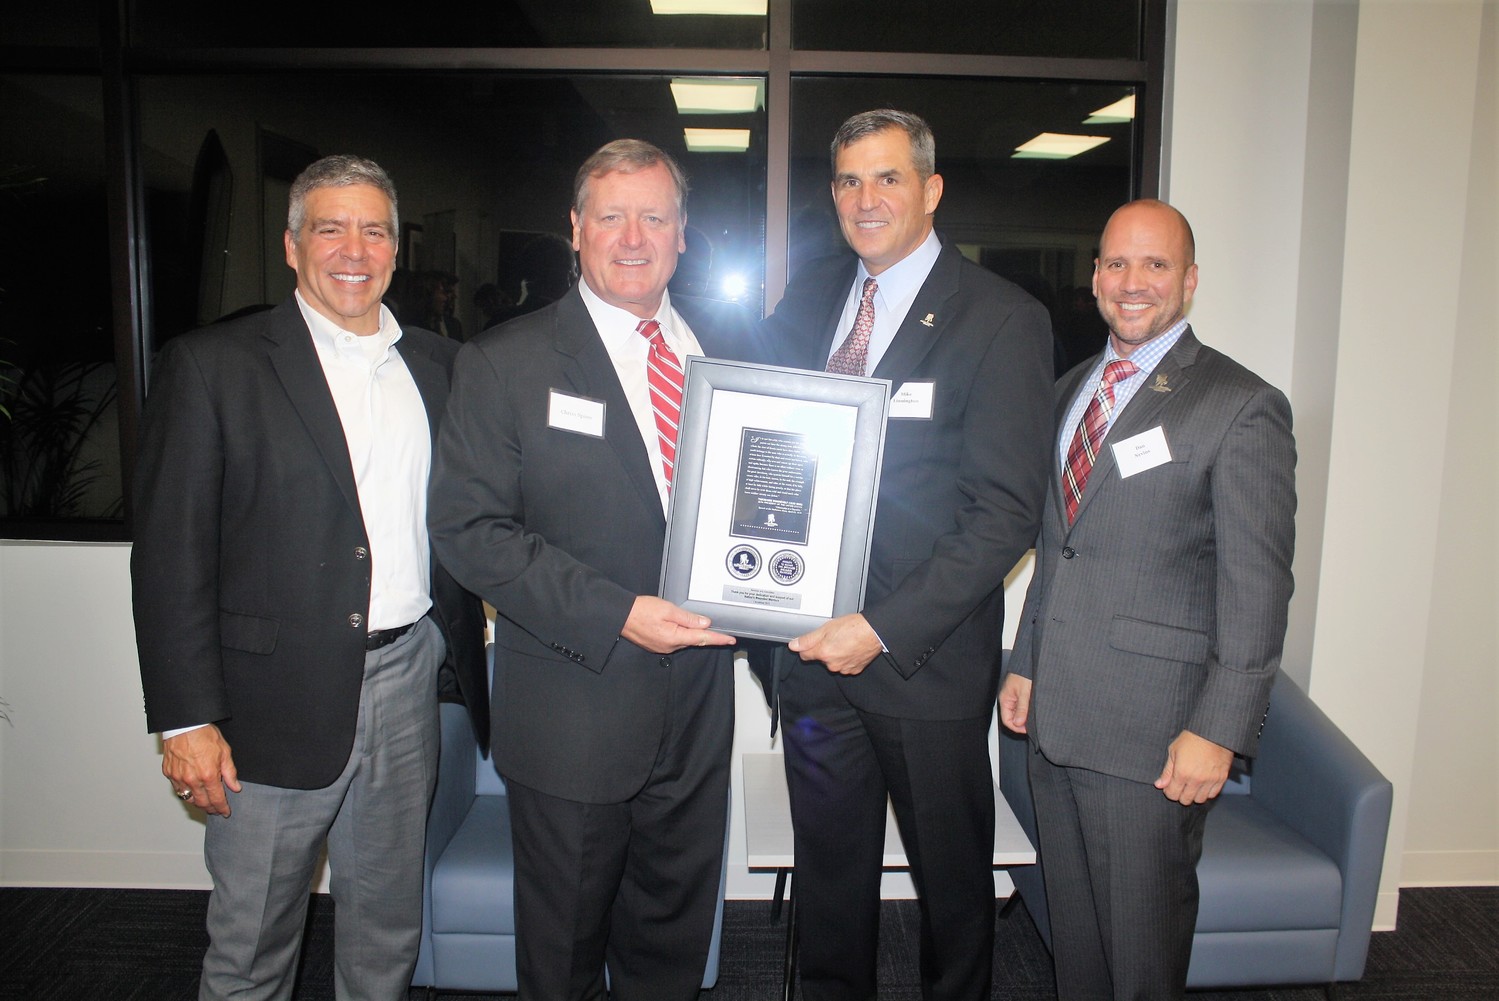 Wounded Warrior Project CEO Mike Linnington (center right) and Staff Sgt. Dan Nevins (right) present Montoya & Associates Principal Owner and Founder Will Montoya and Principal and Senior Advisor Chriss Spires with a commemorative plaque.